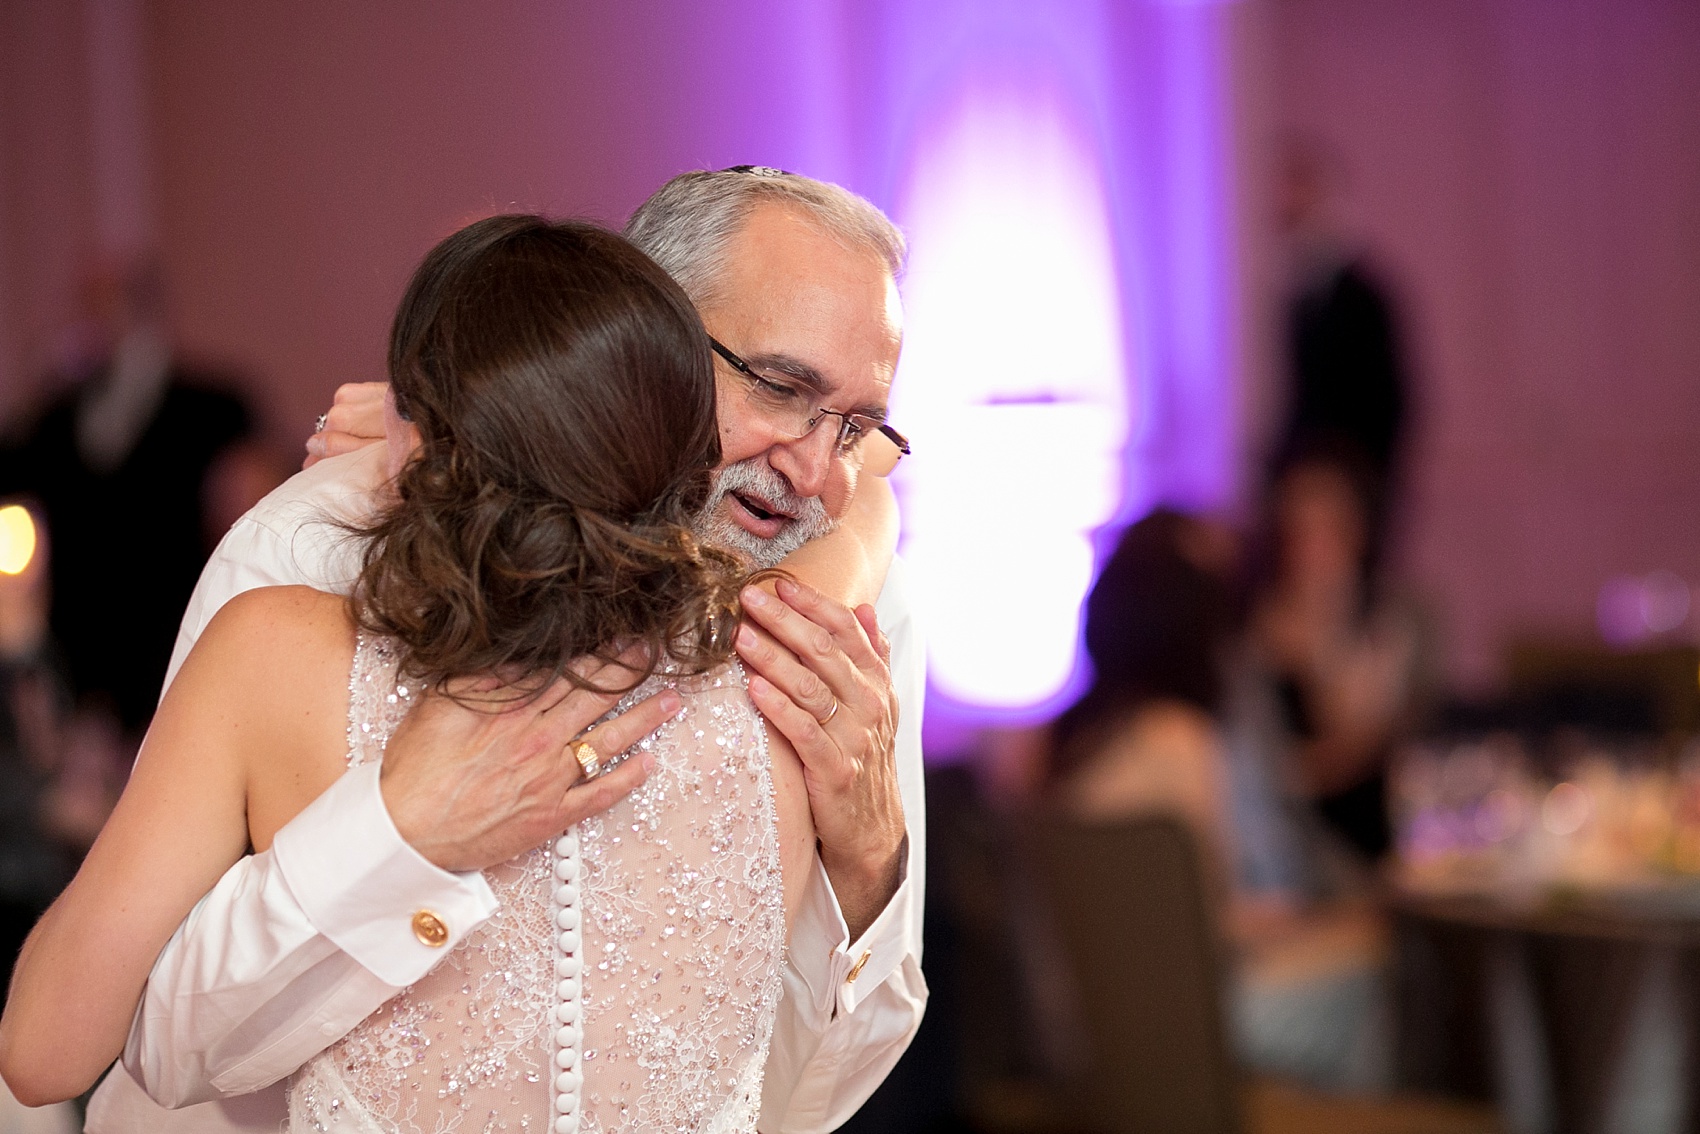 Washington, DC wedding photos by Mikkel Paige. The bride and her dad for a father daughter dance at The Ritz Carlton, Pentagon City.